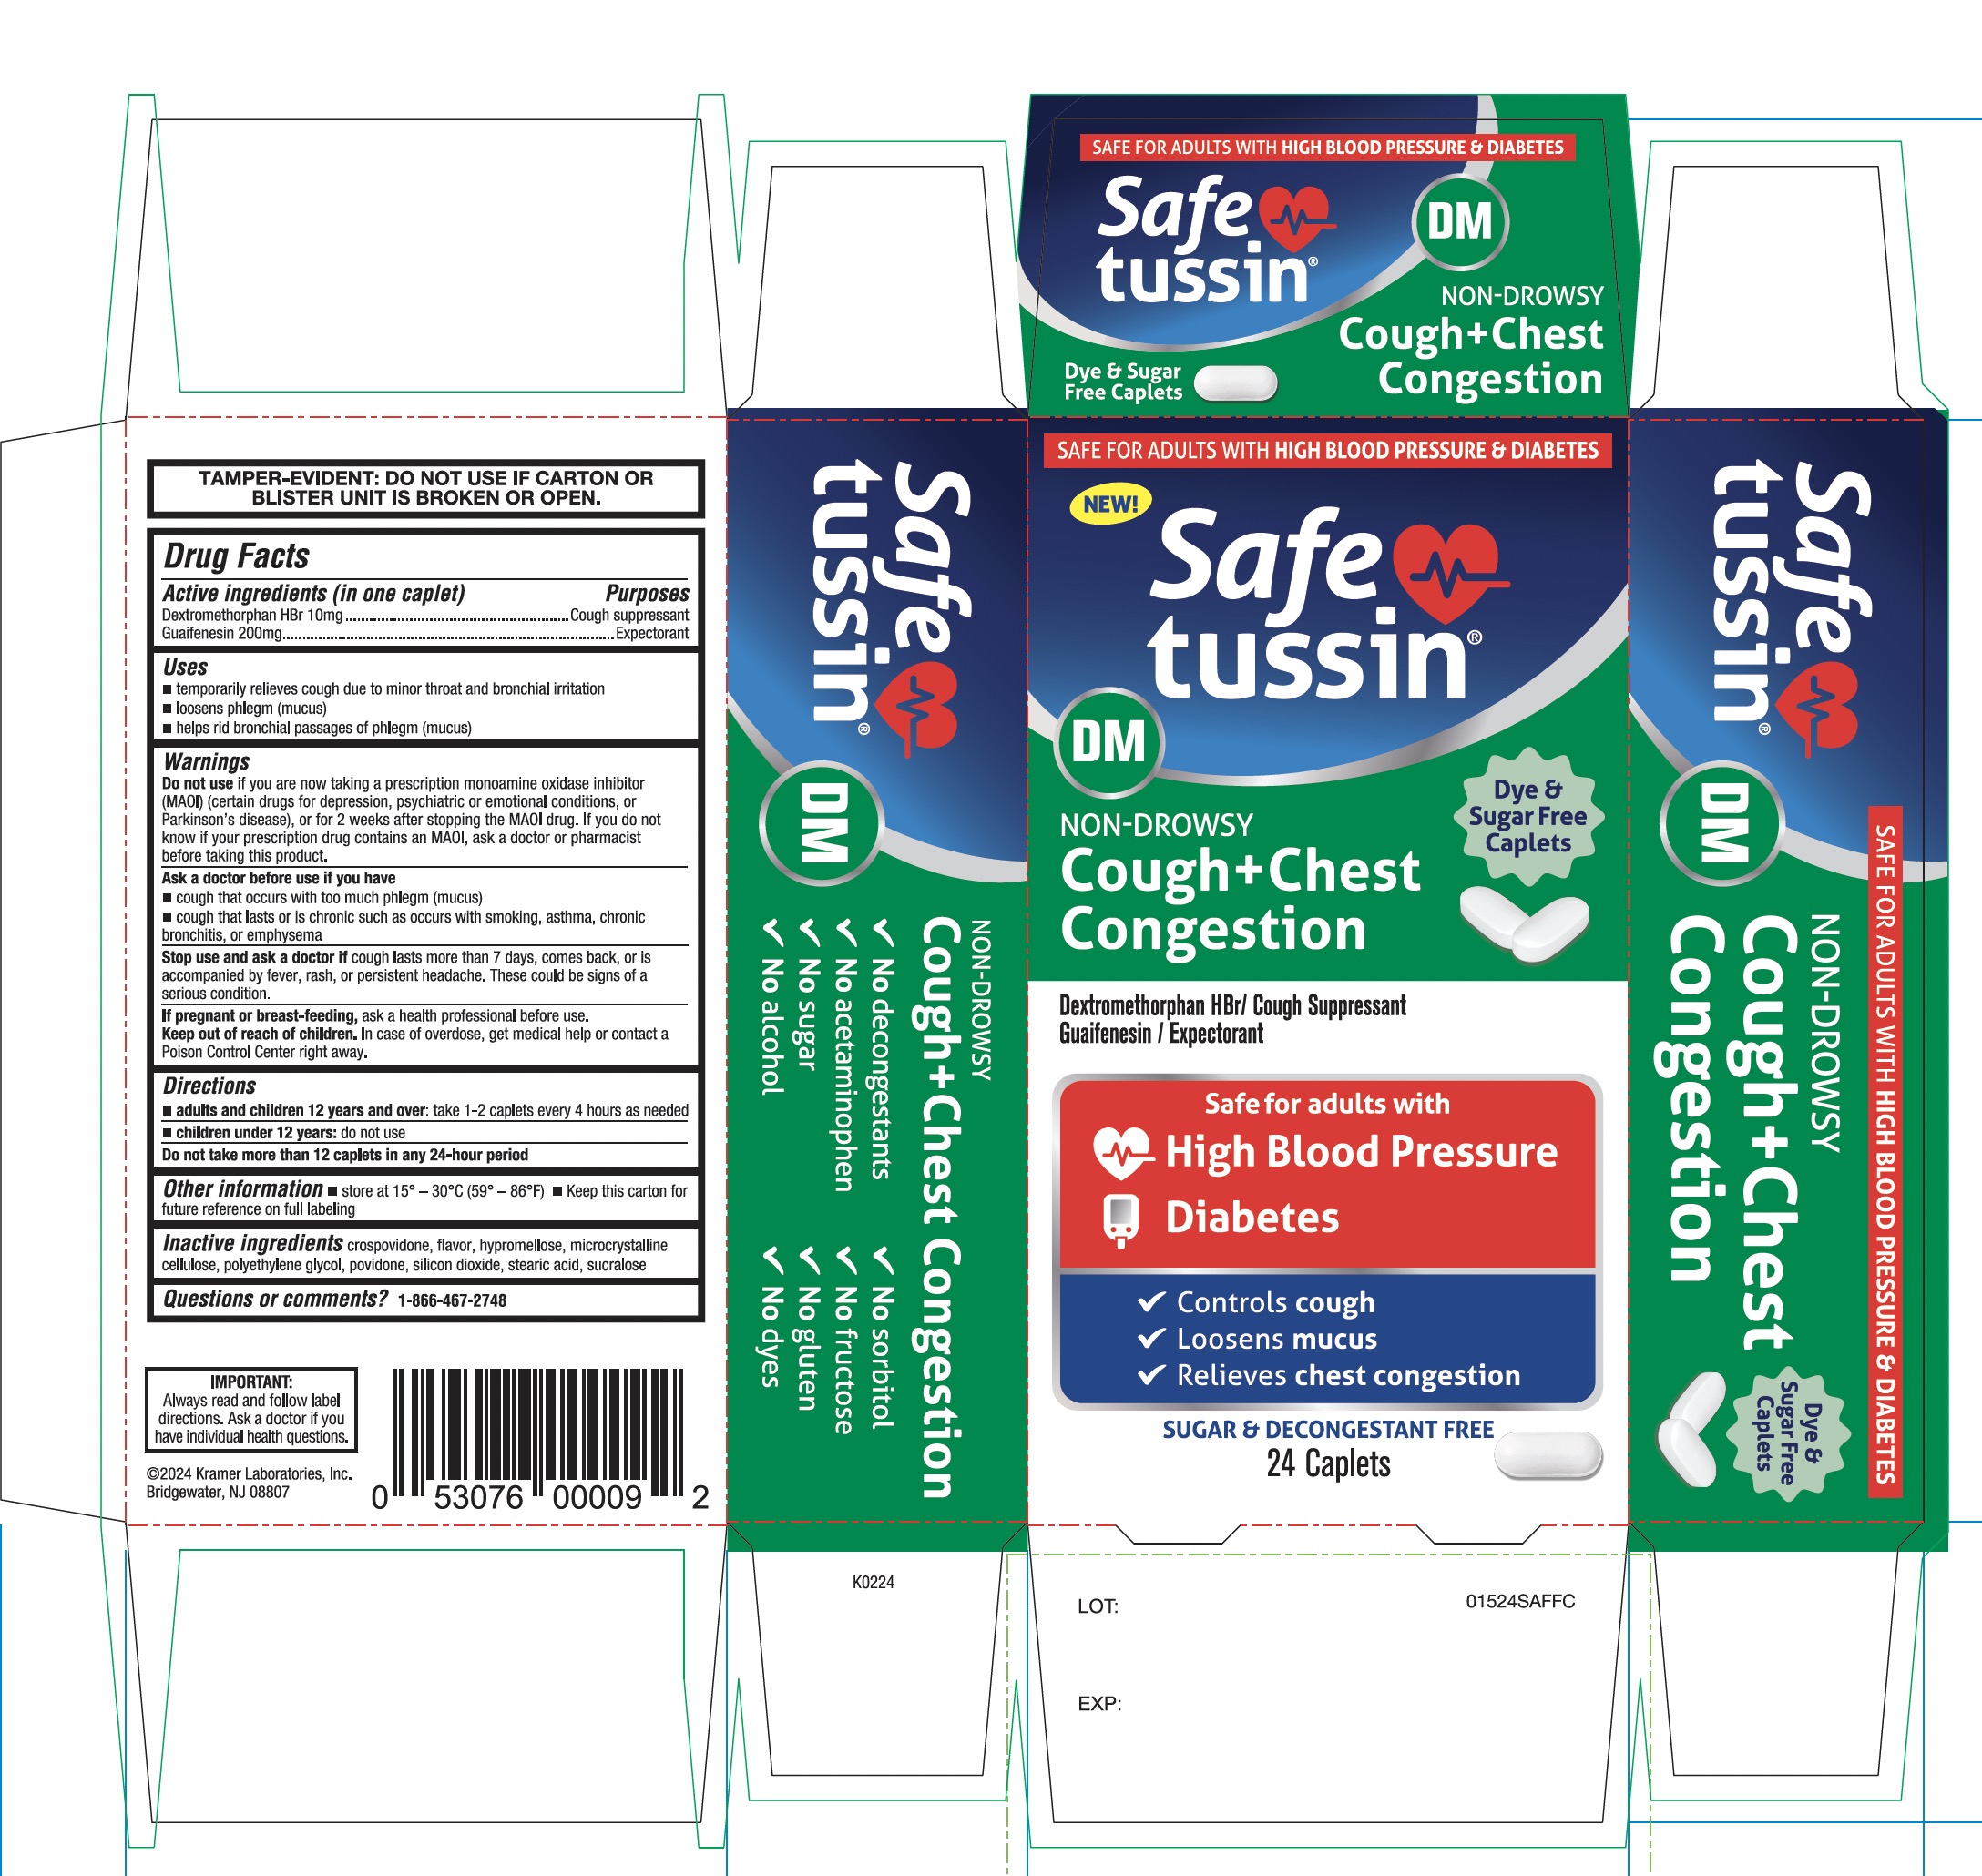 SAFETUSSIN NON-DROWSY COUGH+CHEST CONGESTION 24 CAPLETS